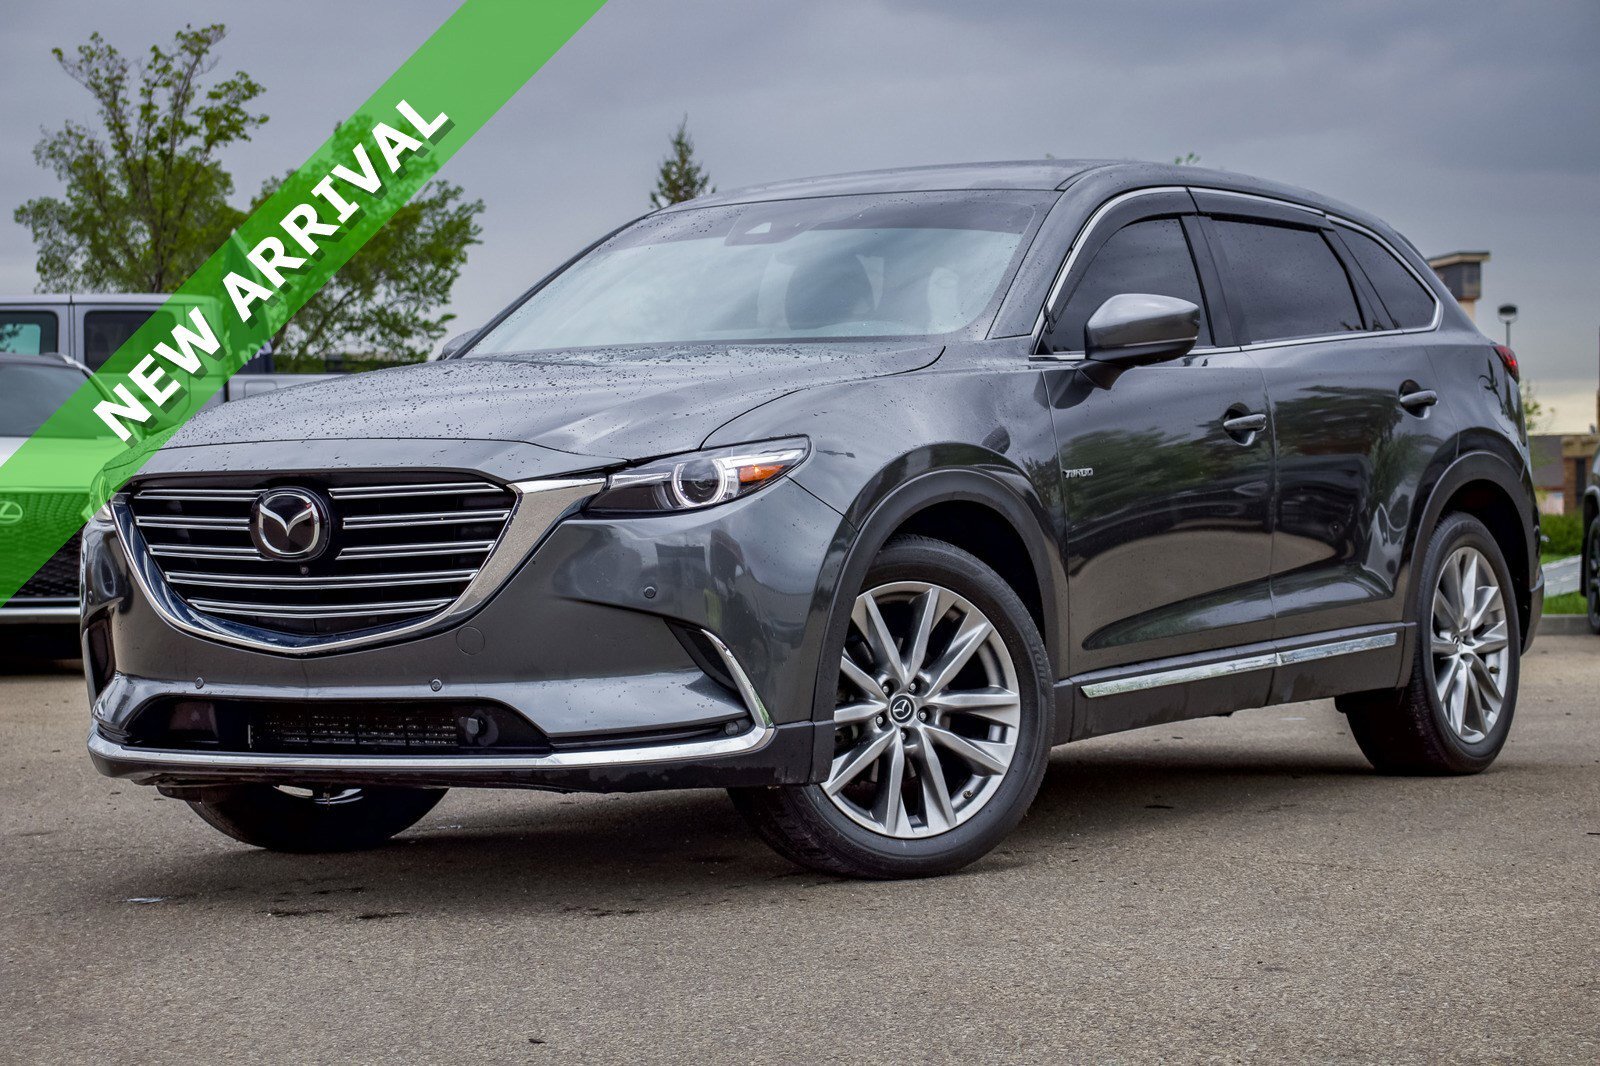 2019 Mazda CX-9 GT AWD | 7 PASSANGER | LEATHER | SUNROOF